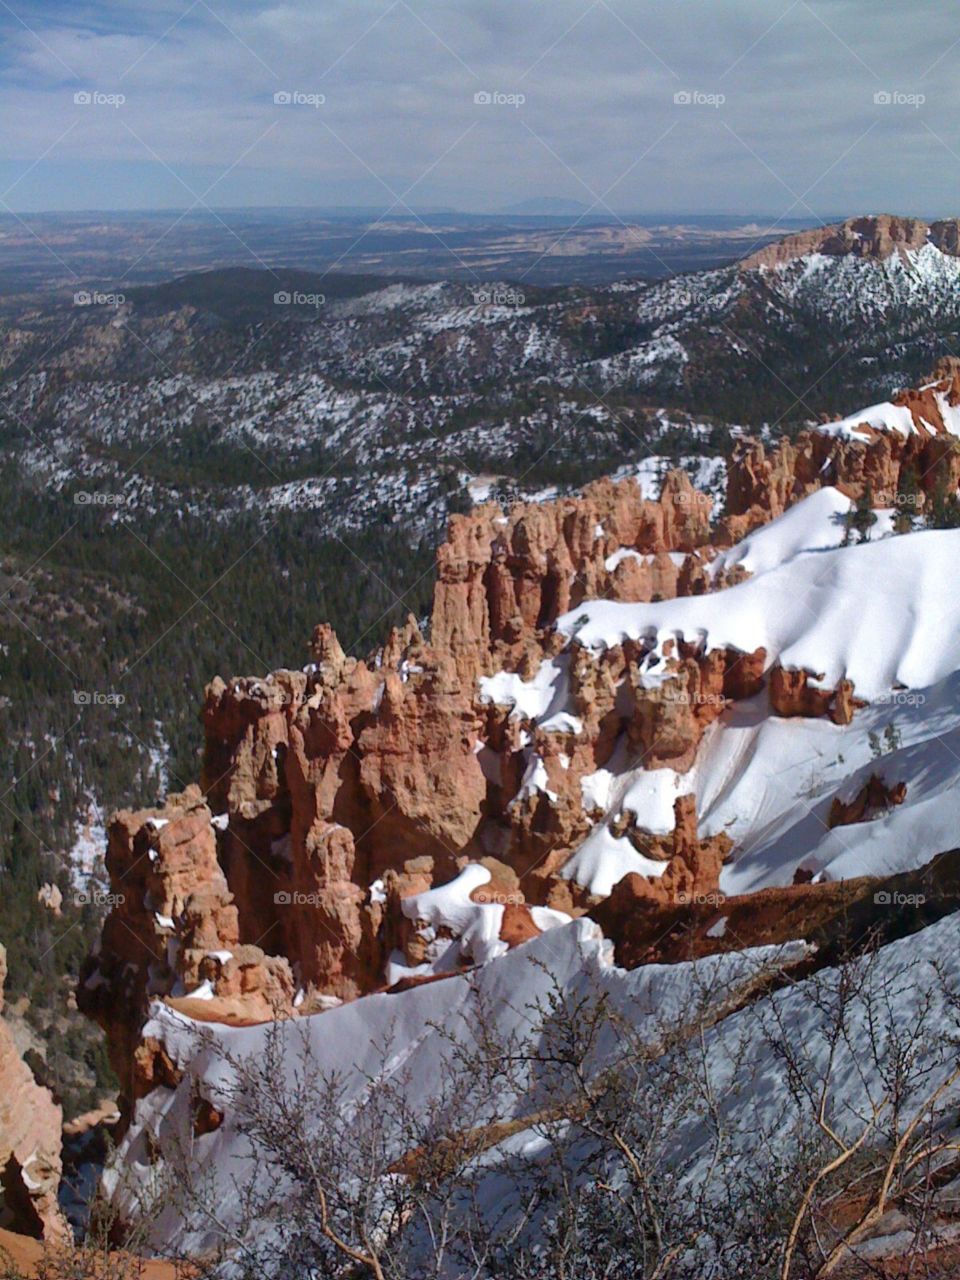 Bryce Canyon, UT in April